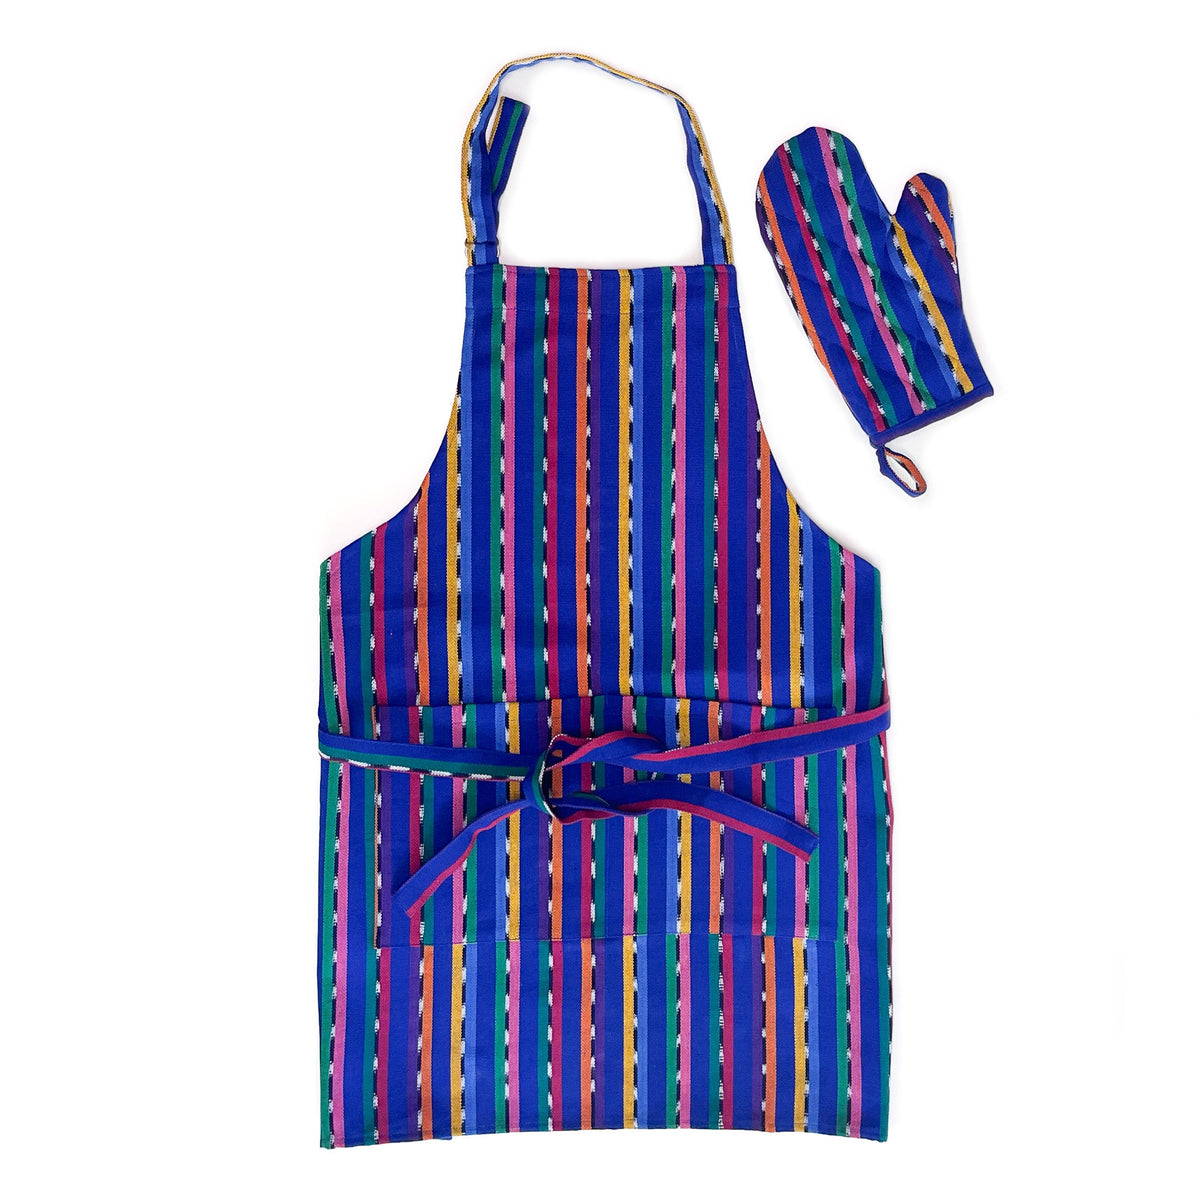 Flat lay image of an apron and matching oven mitt in colorful blue handwoven Guatemalan fabric with multicolored stripes. The apron is tied in front and has adjustable straps.